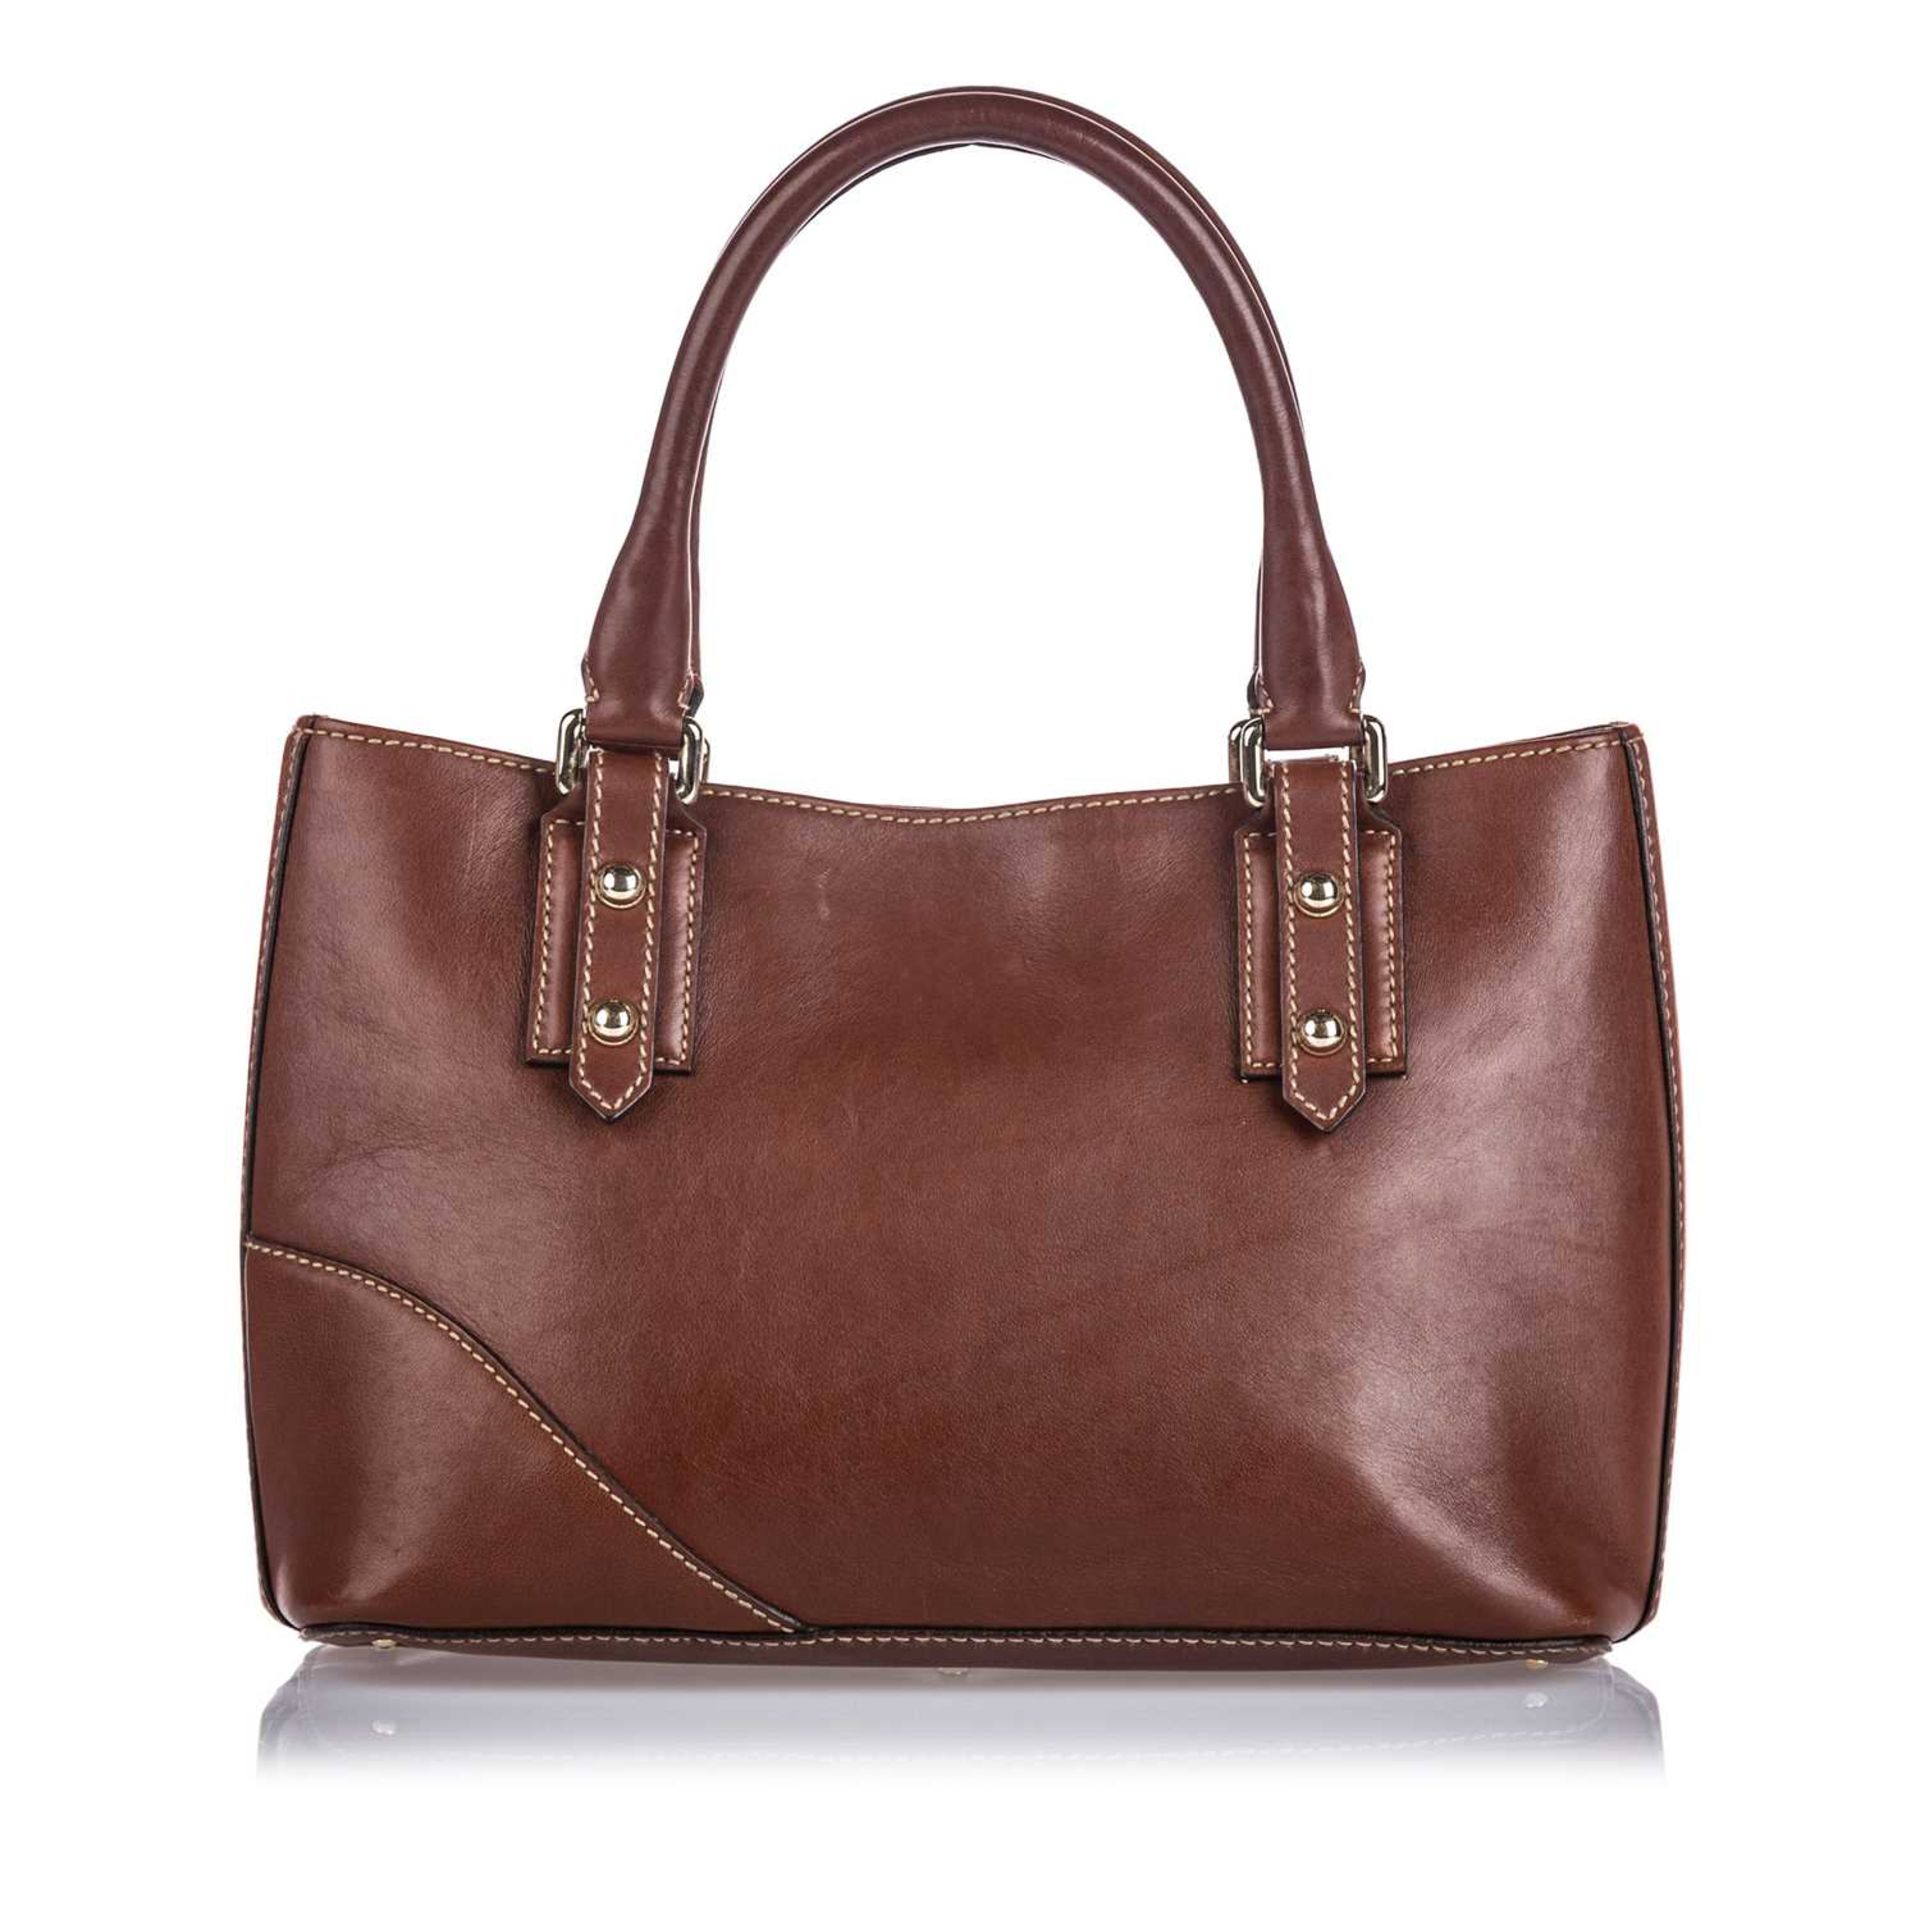 A Gucci brown leather 'Hasler' tote, - Image 4 of 6